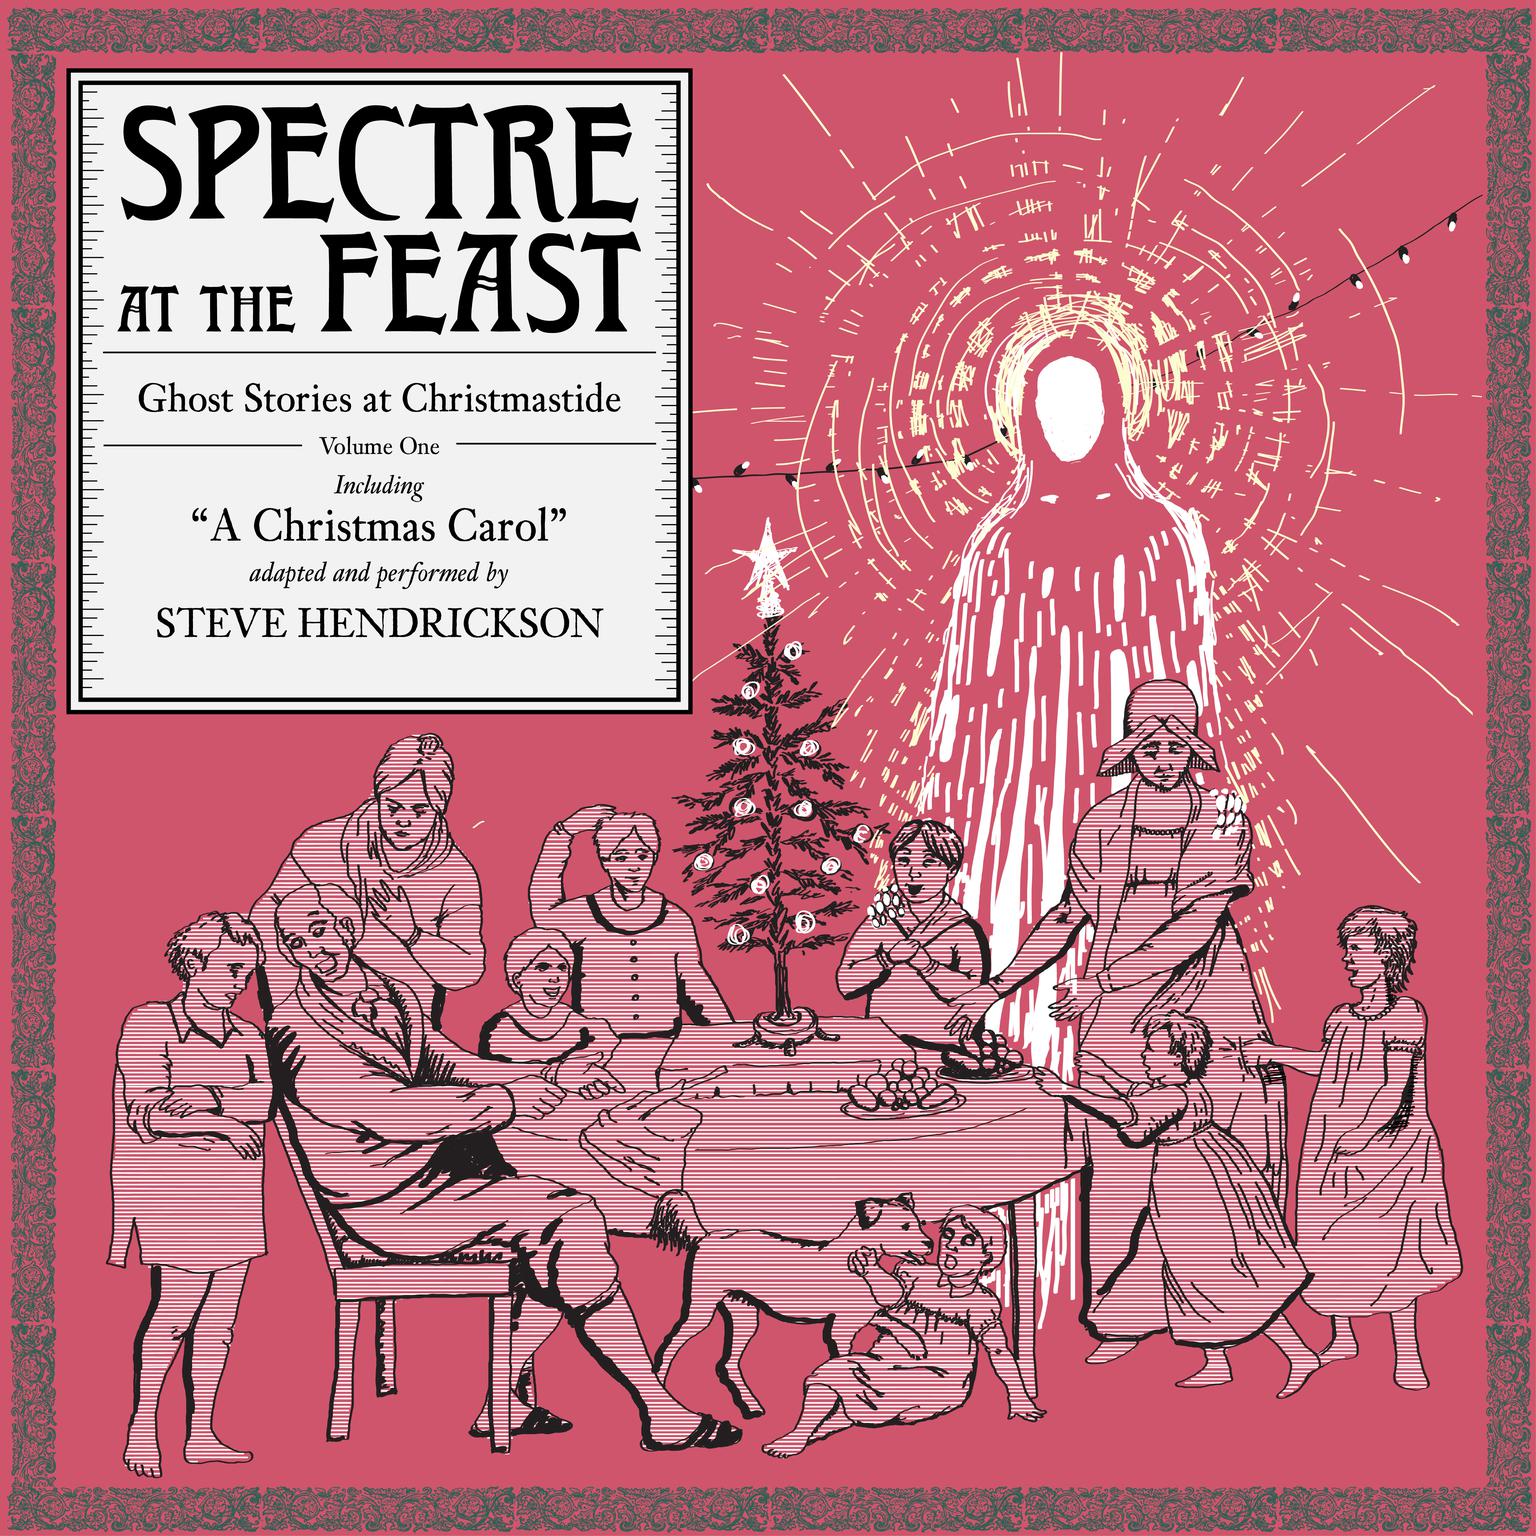 Spectre at the Feast: Ghost Stories at Christmastide: Volume One Audiobook, by Steve Hendrickson